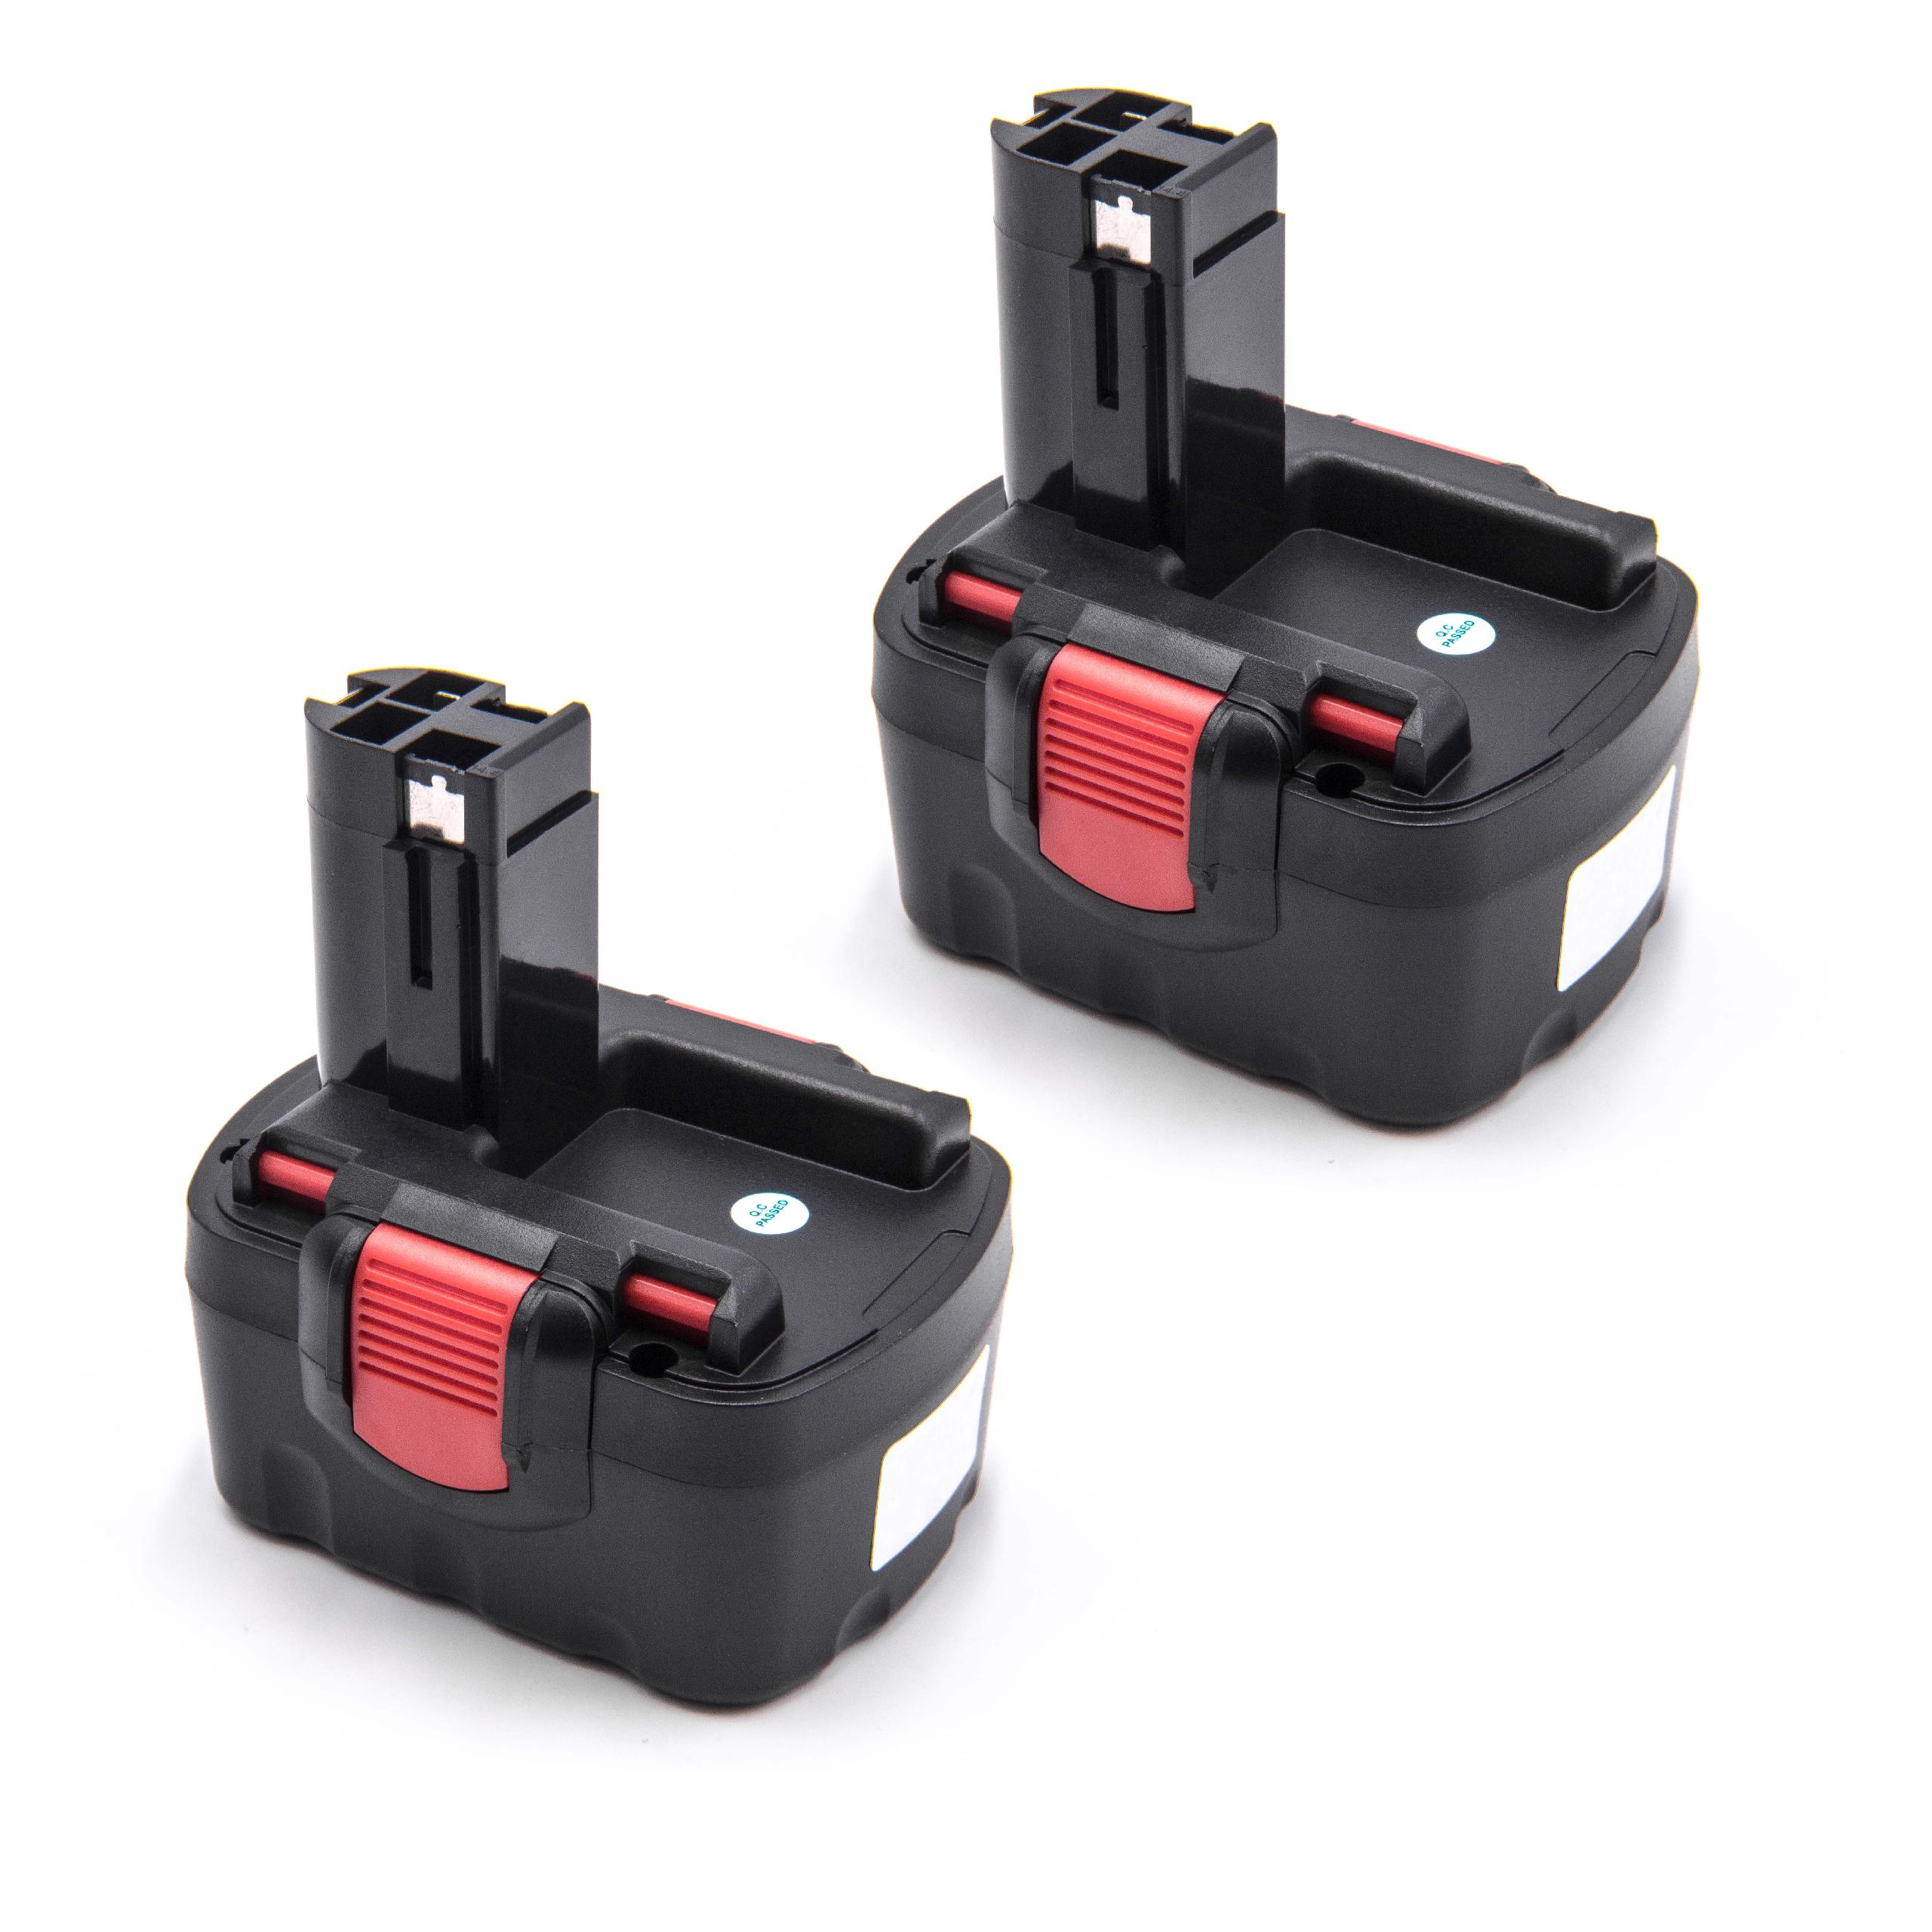 Electric Power Tool Battery (2x Unit) Replaces Bosch 2 607 335 263, 1617S0004W - 1500 mAh, 14.4 V, NiMH